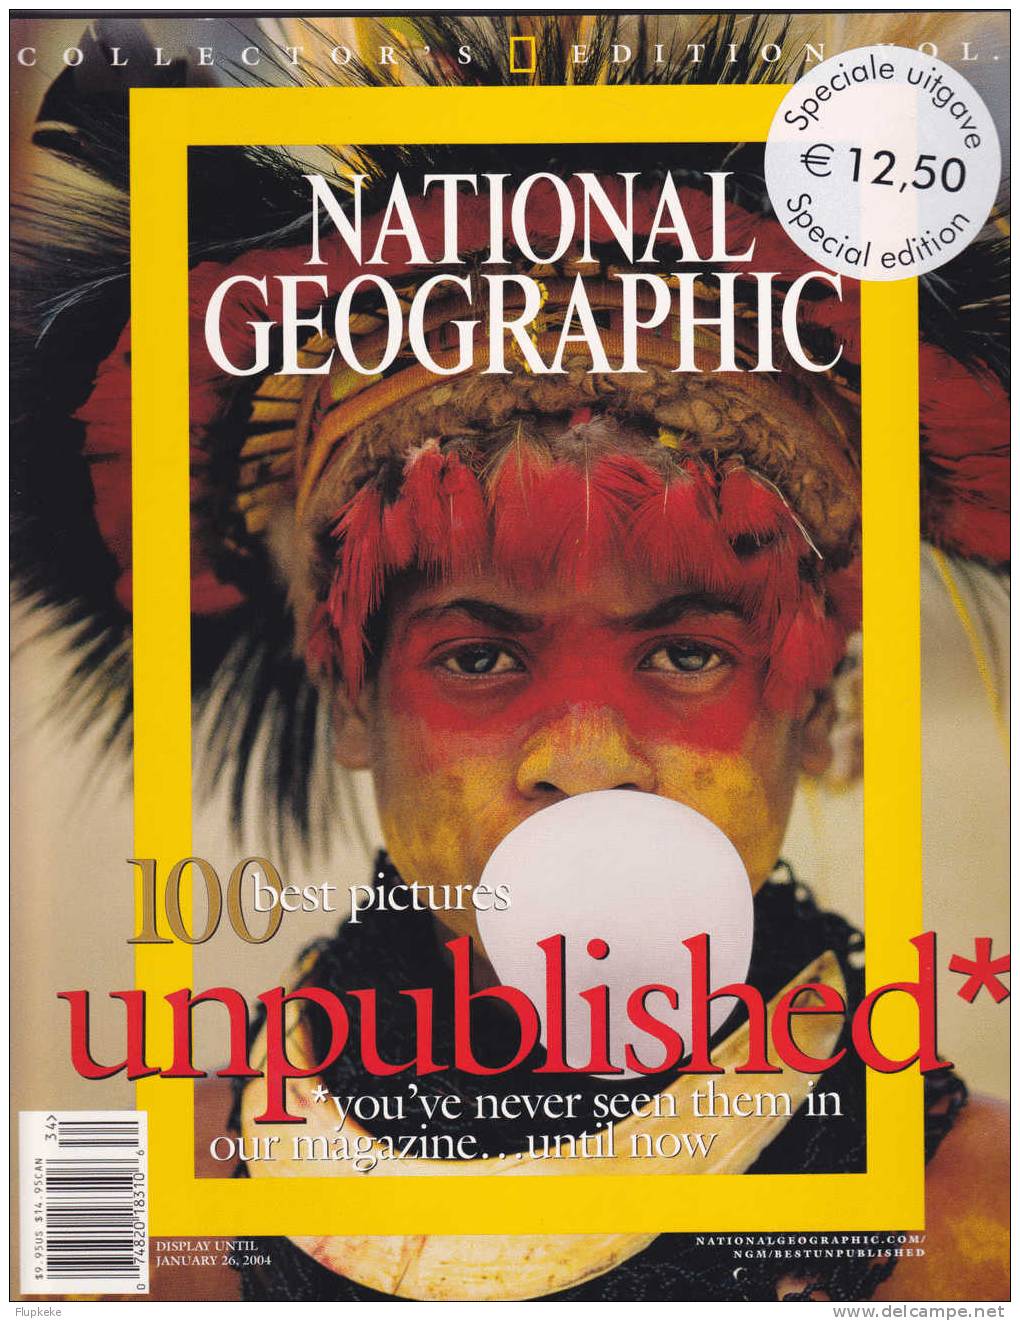 National Geographic Collector´s Edition Vol. 6 January 2004 - Voyage/ Exploration